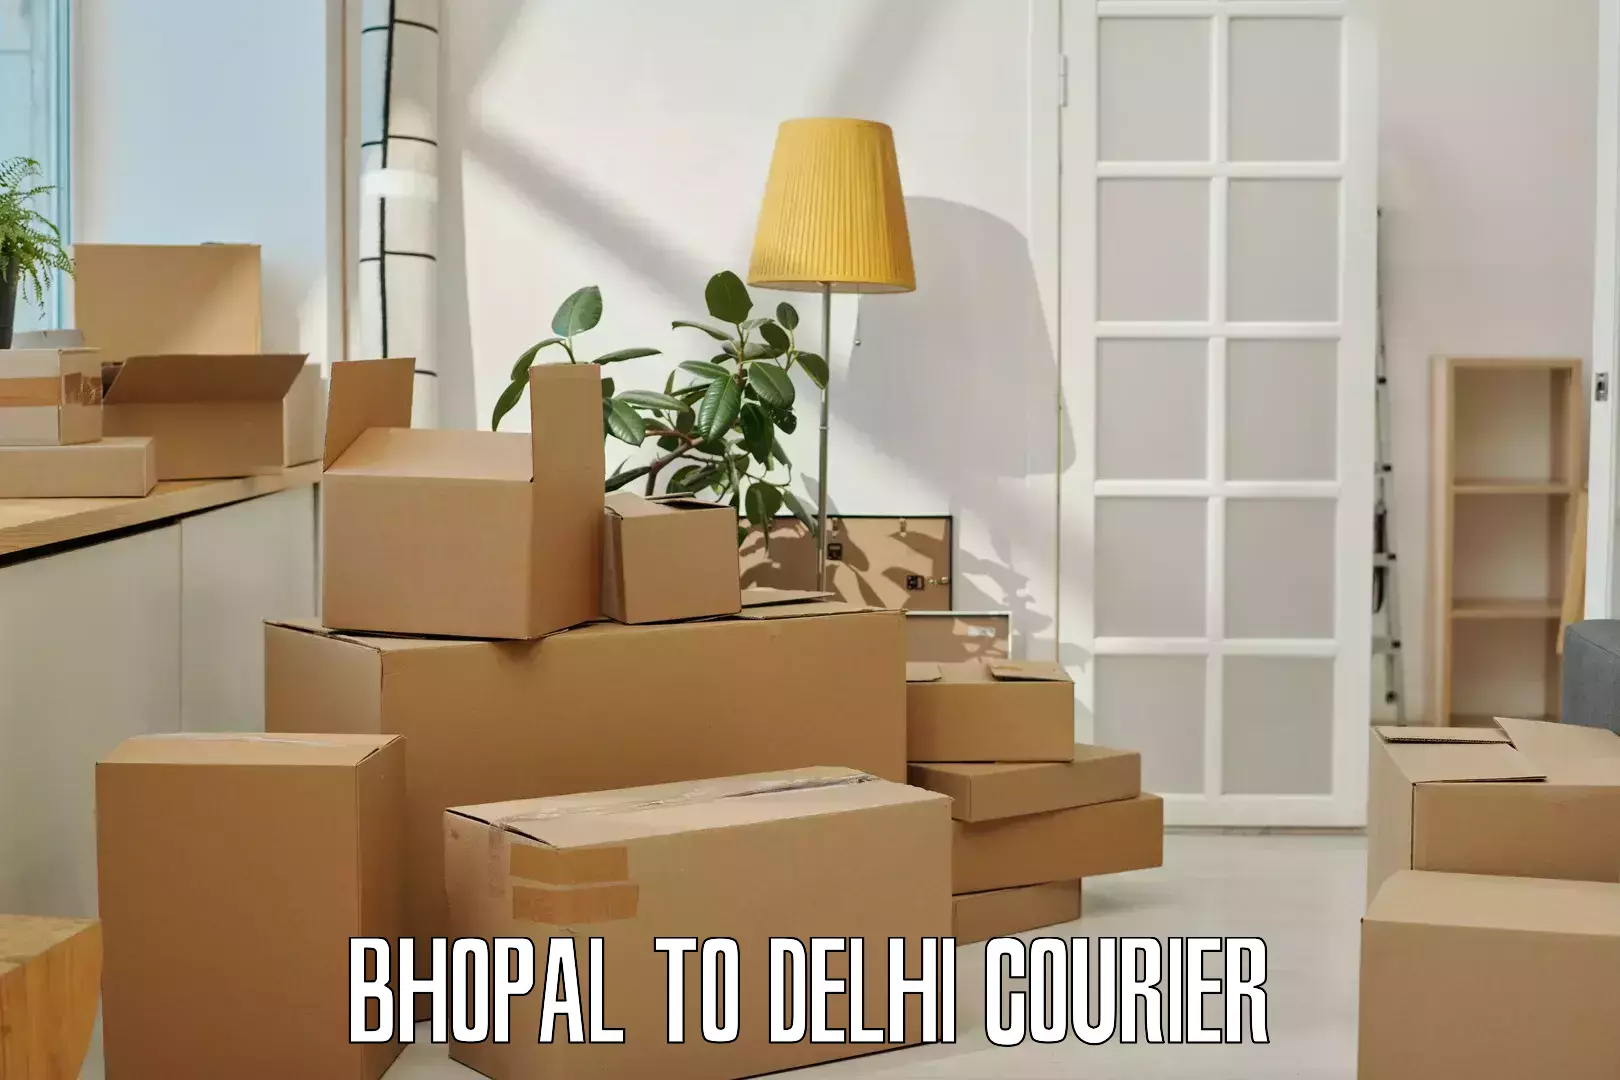 Courier service innovation Bhopal to Burari